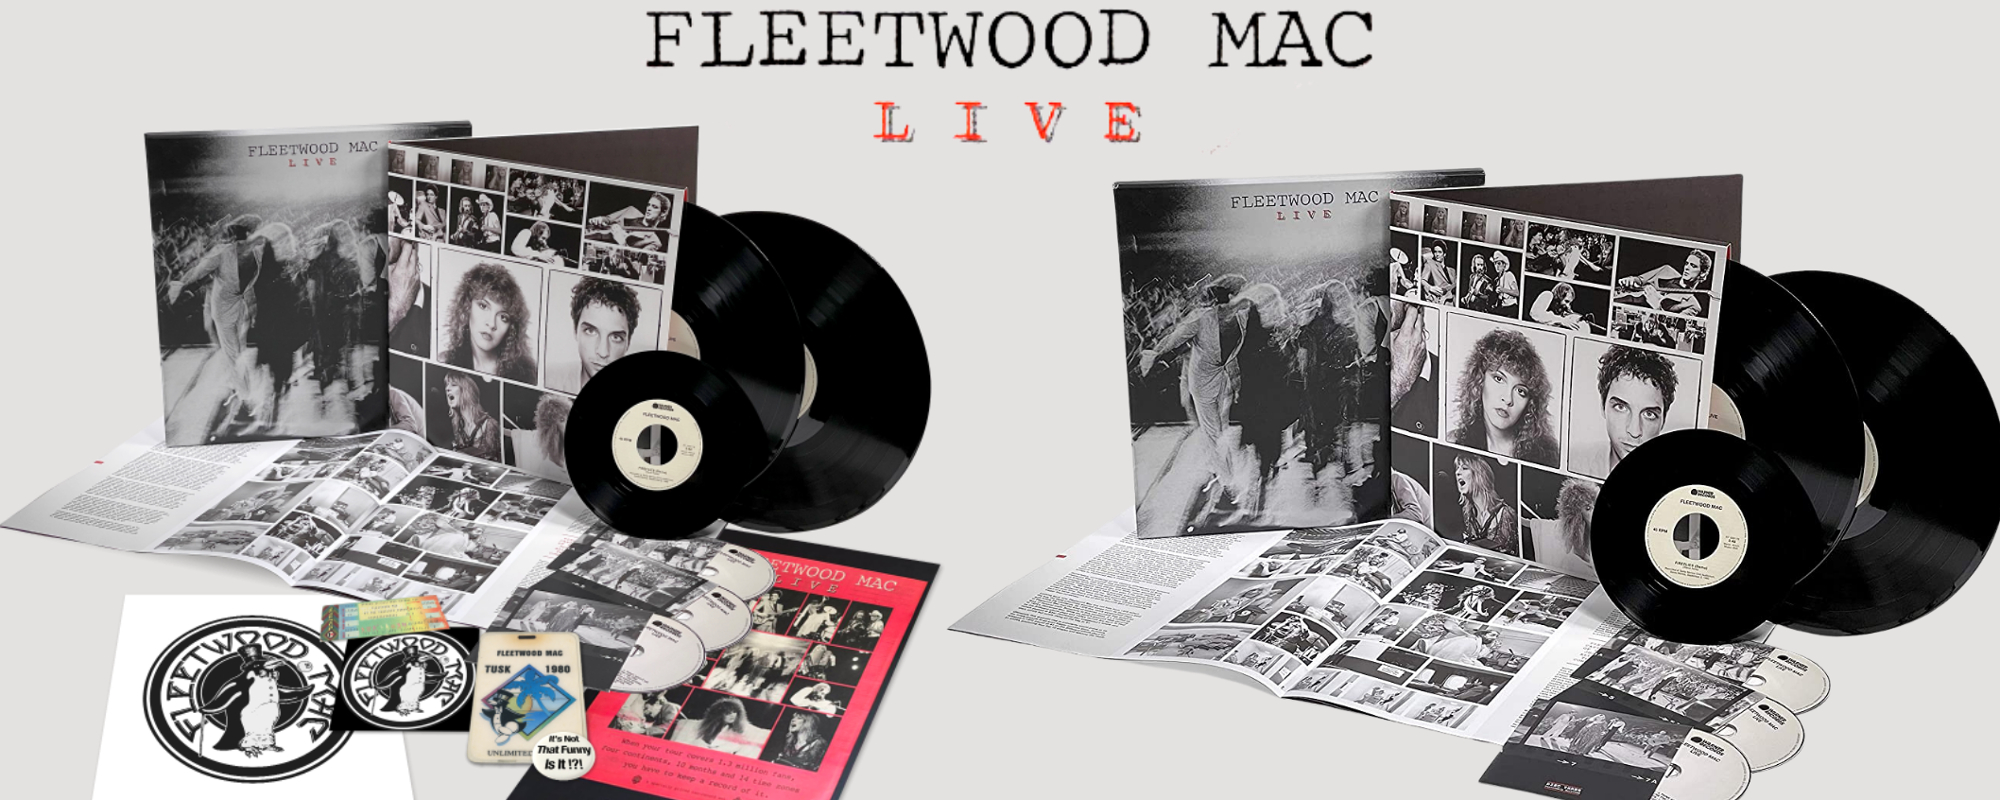 Review: Fleetwood Mac’s ‘Tusk’ Tour Live Gets An Expanded ‘Super Deluxe’ Reissue